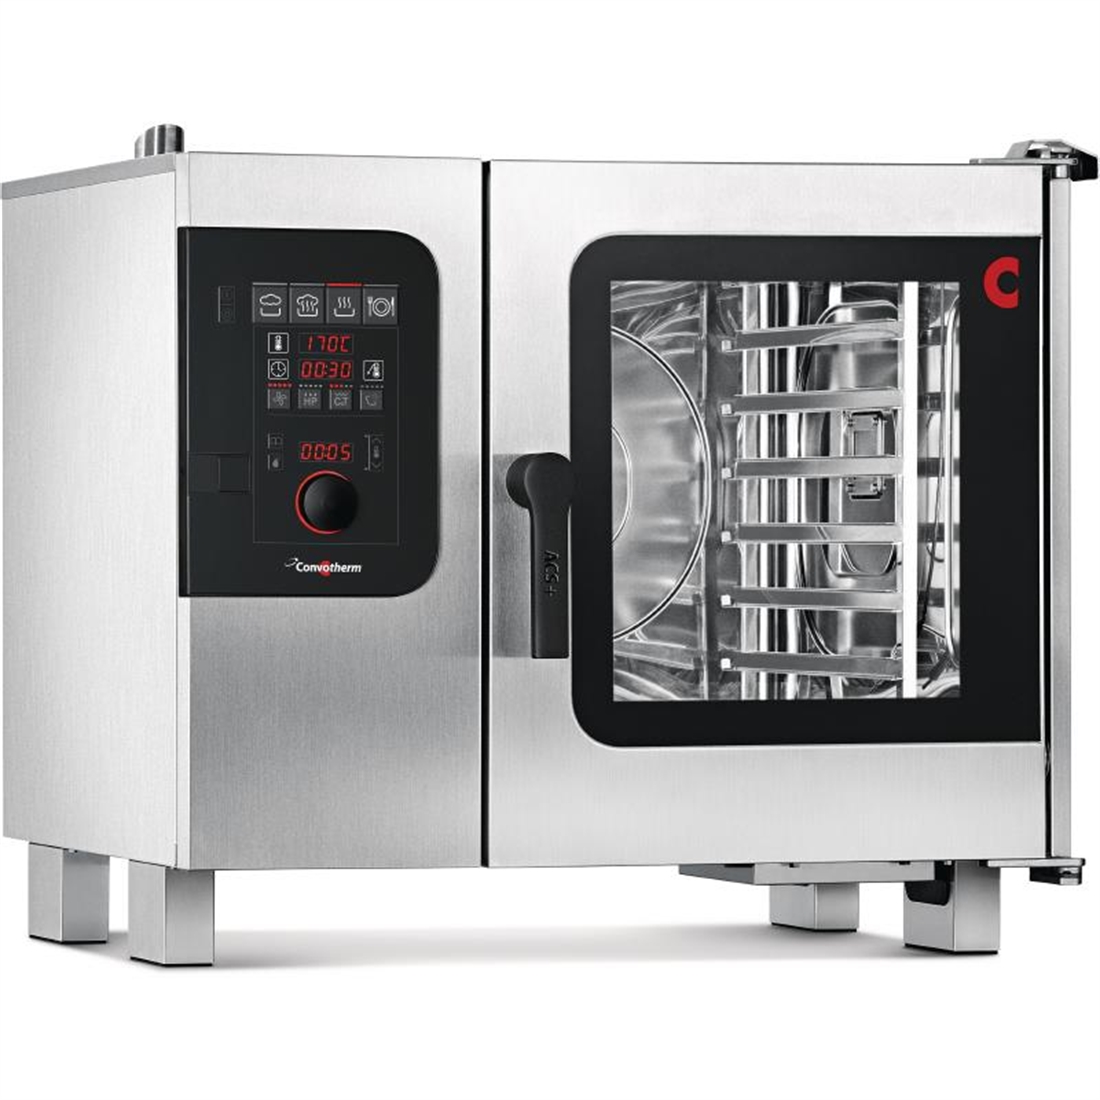 Convotherm 4 easyDial Combi Oven 6 x 1 x1 GN Grid and Install